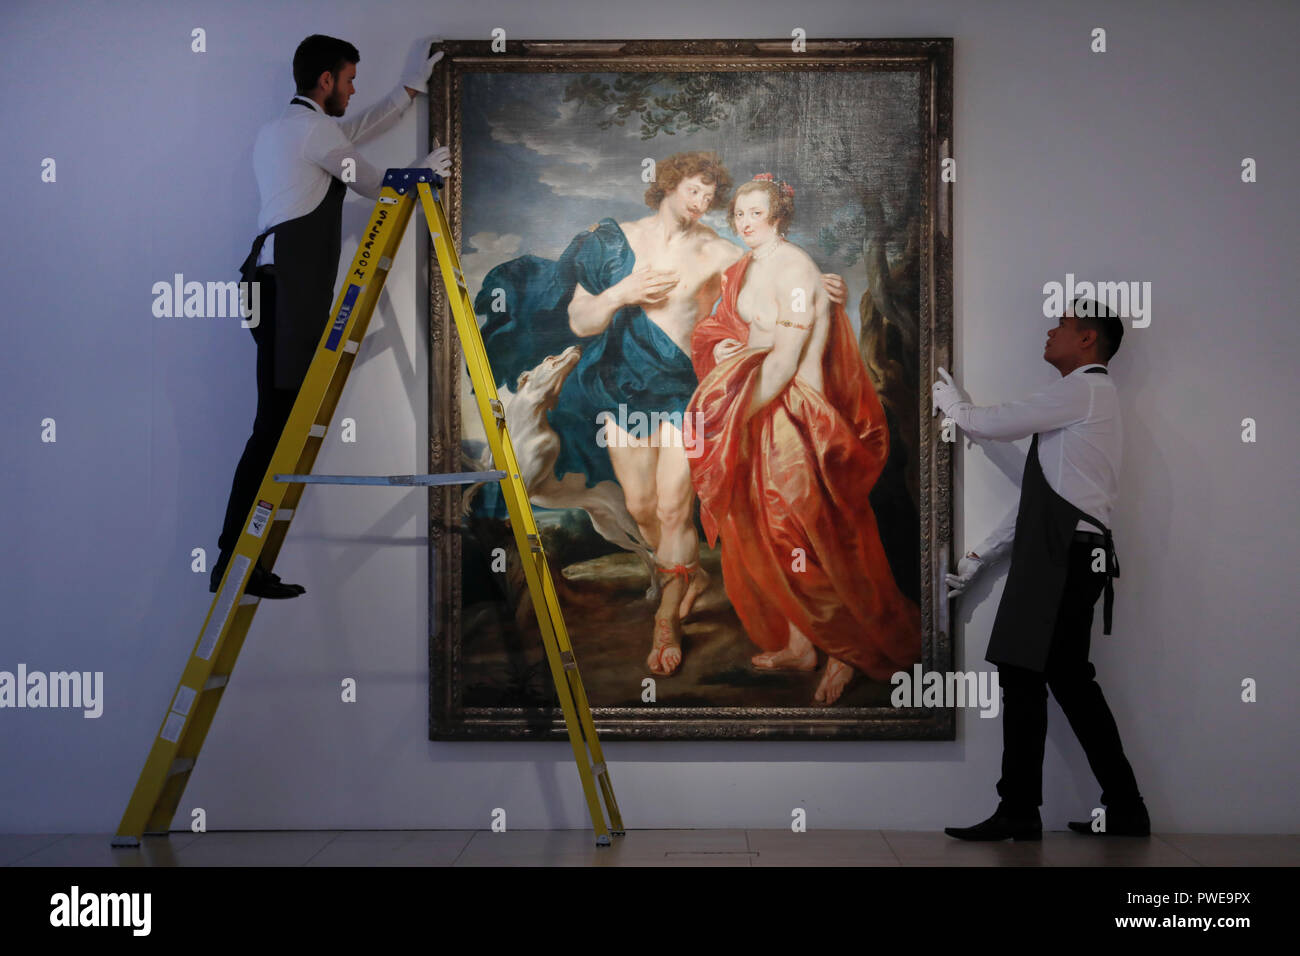 London, UK, 16th Oct 2018. Christie's art handlers adjust Dutch master Anthony Van Dyck 'swork 'Venus and Adonis' at Christie's AuctionHouse in London, UK, Tuesday October 16, 2017. The piece is expected to achieve up to £3.5million when is comes to auction as part of the Albada Jelgersma Collection sale during Christie's Classic Week in December. Photograph : Credit: Luke MacGregor/Alamy Live News Stock Photo